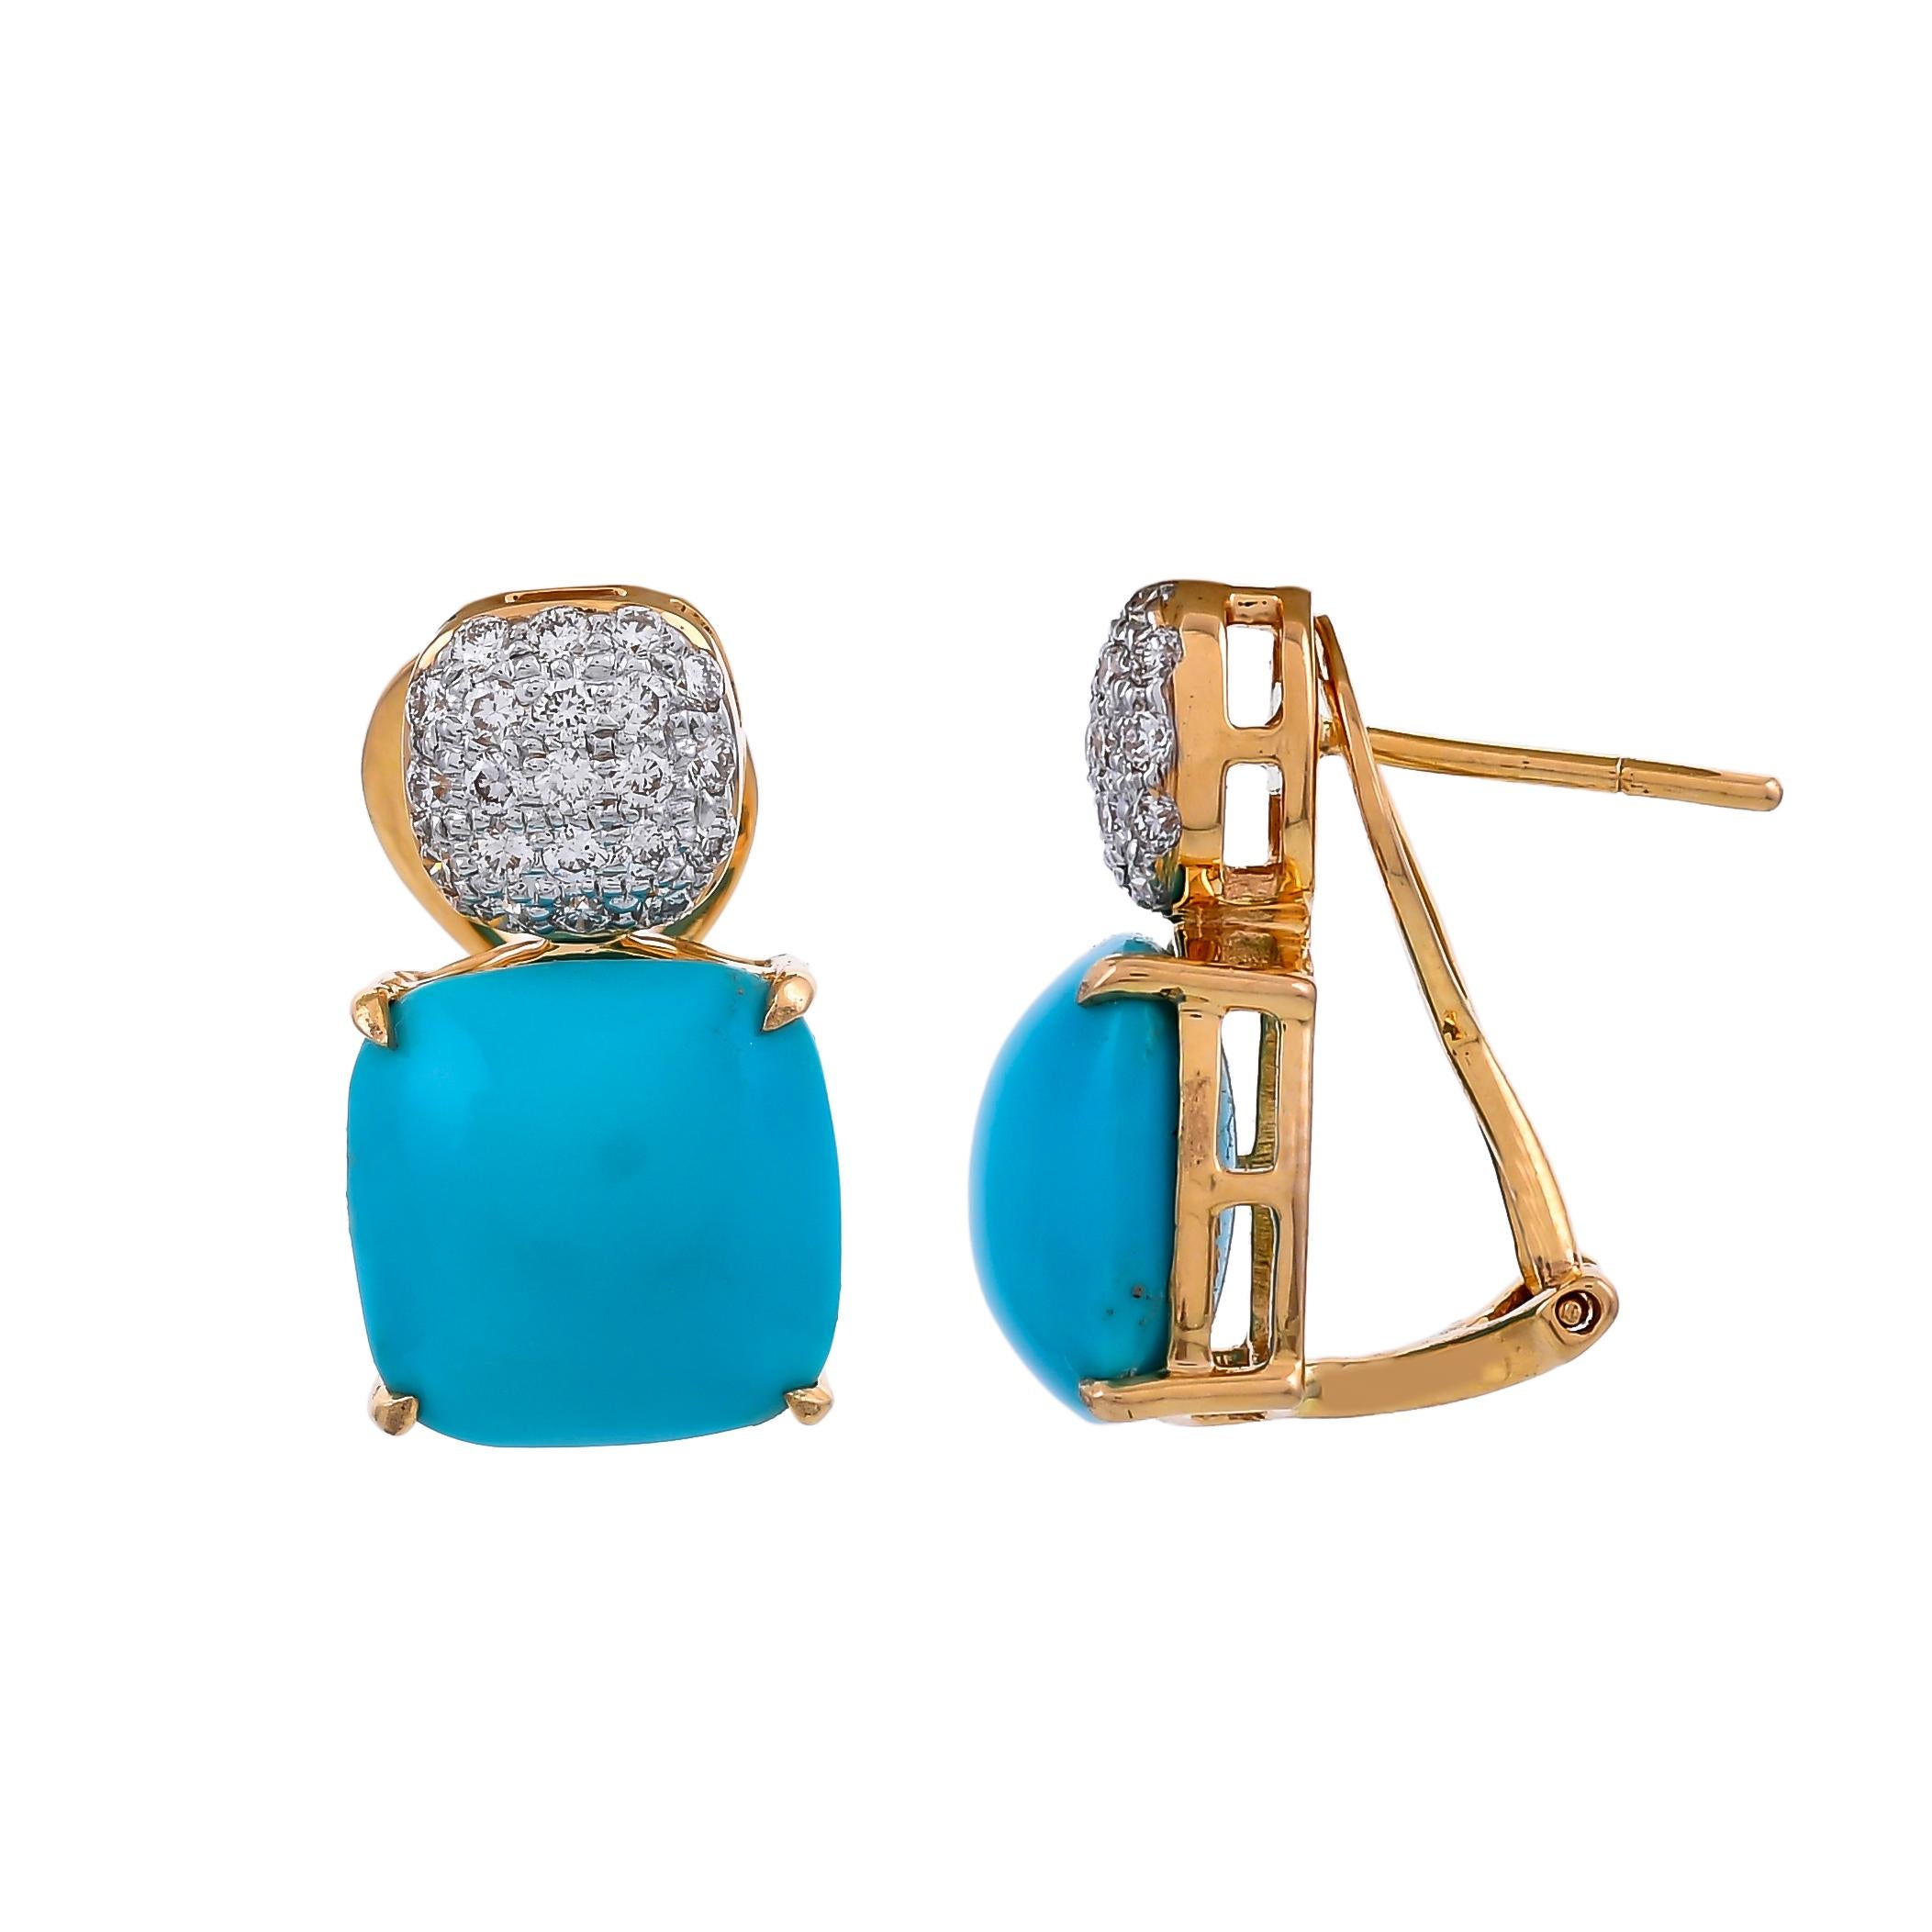 Crafted in 18 Karat yellow gold, this simple and chic design earrings features a 9.83 carats fine turquoise cabochon embellished with 0.57 carats pave set diamonds.
Add extra sparkle with this precious and one of a kind piece.
Stone Size-11x11mm